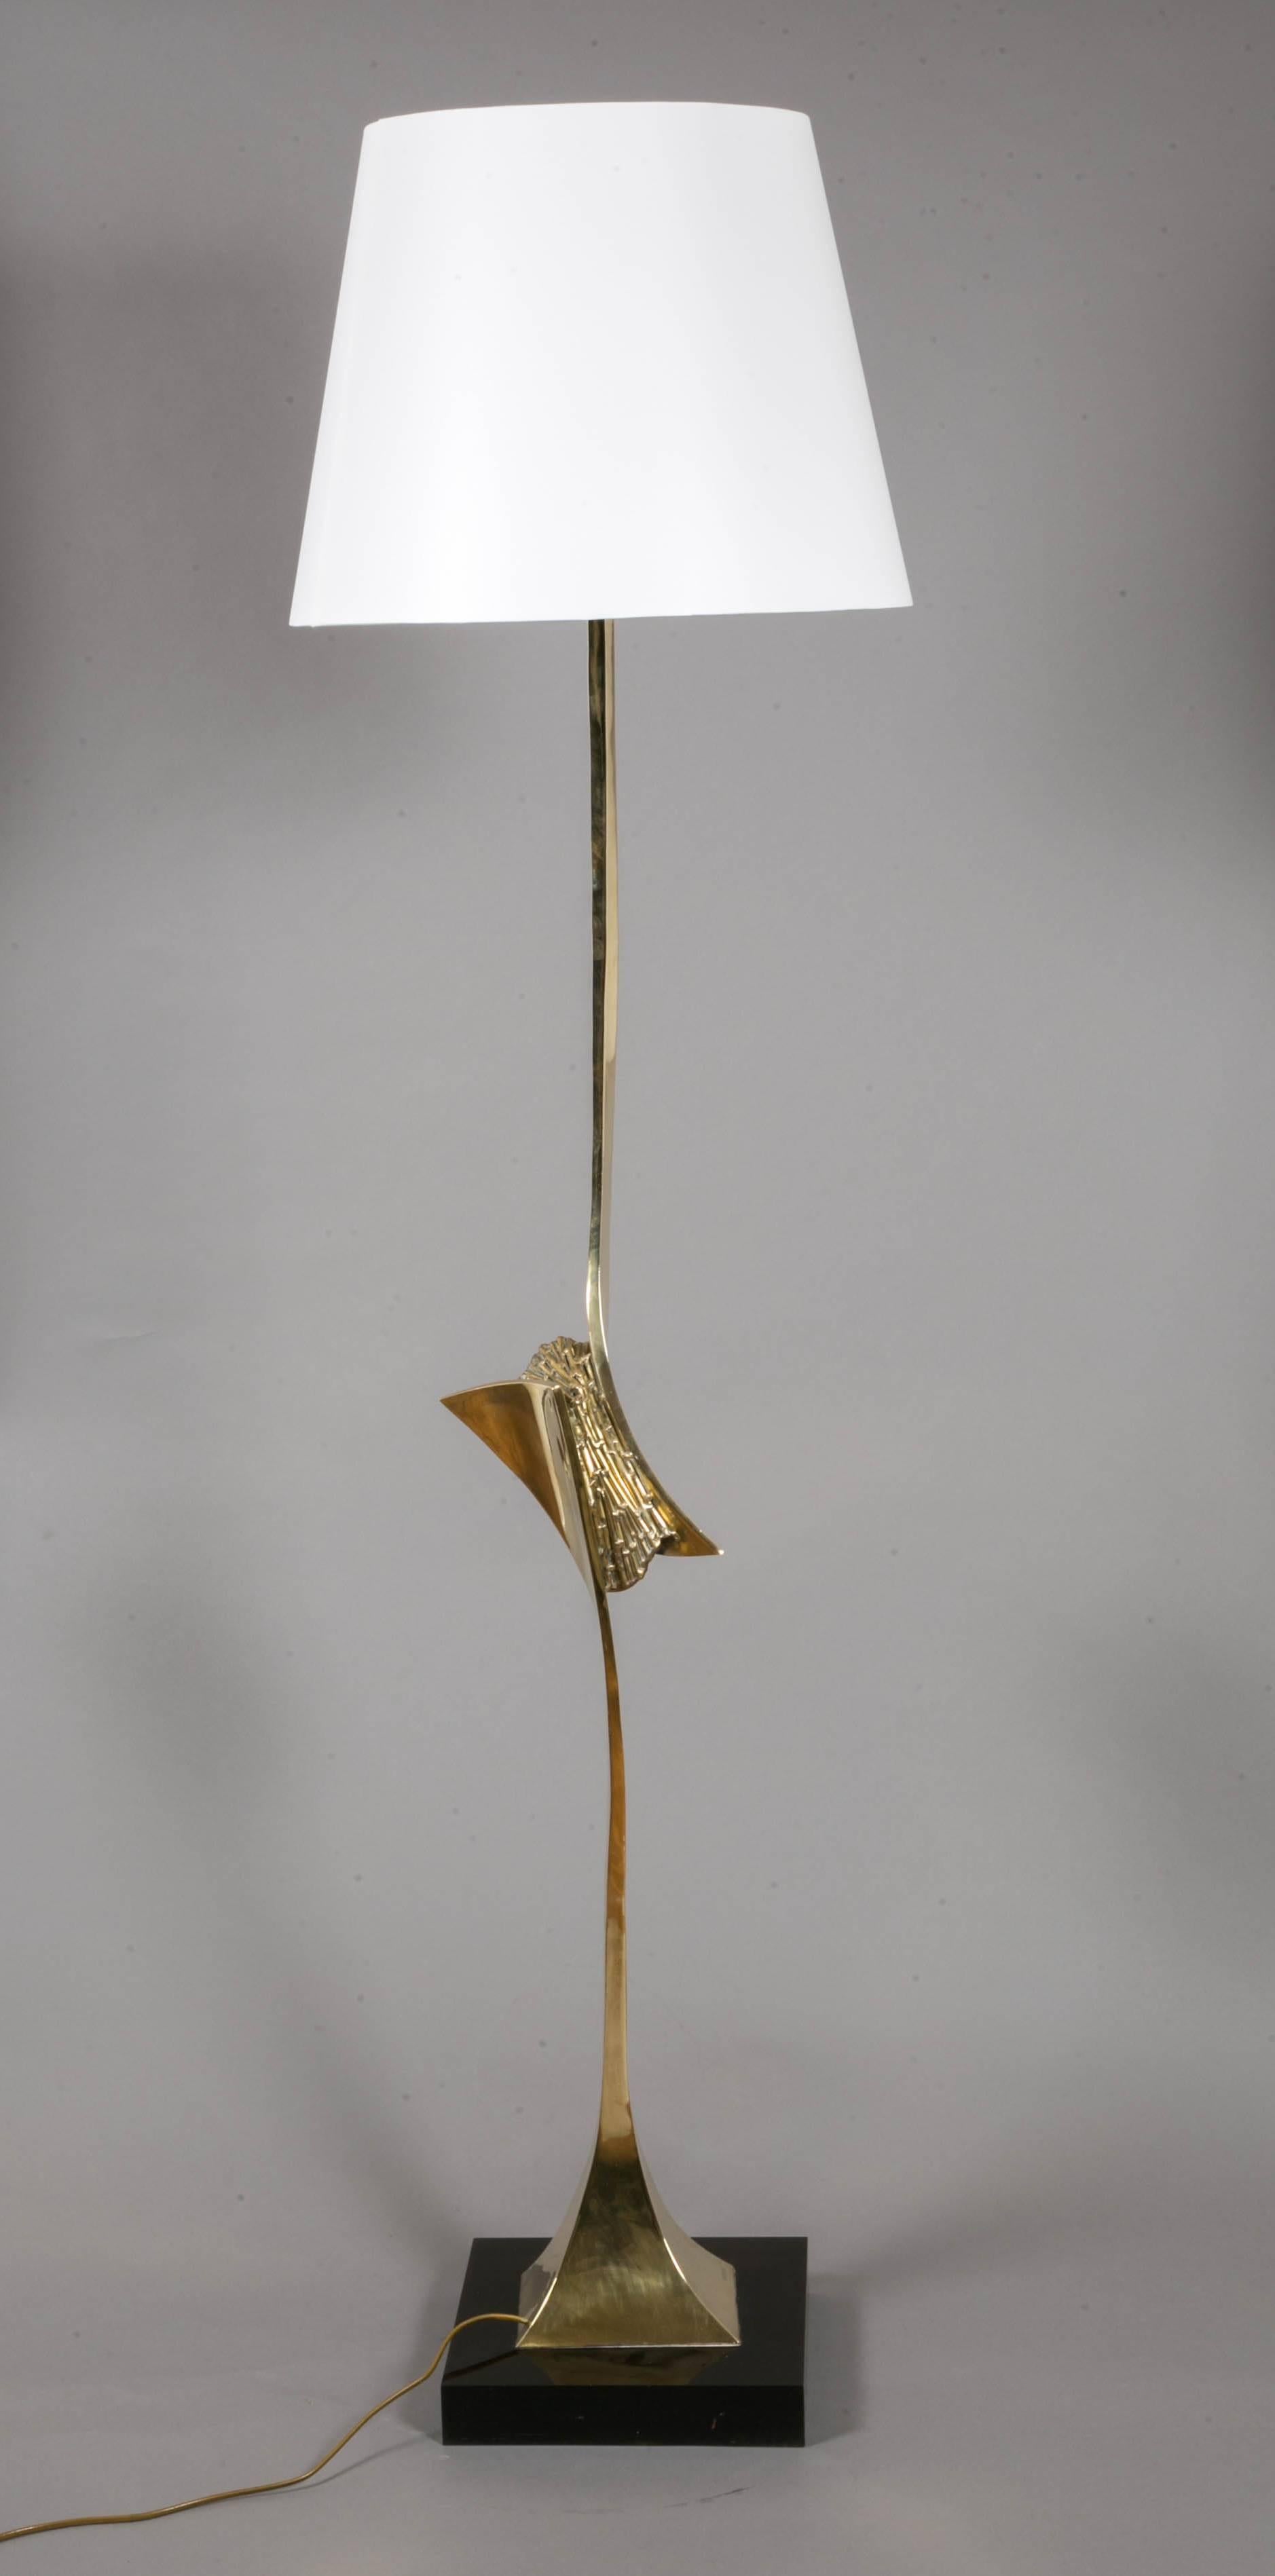 High gilt brass sculpted floor lamp, 1975, by Claude Santarelli said Santa, Paris, 1925-1979.
Central asymmetrical design. Square brown Lucite base.
Signed. Base width 30 cm-12 inches. 
White fabric shade, with a drawing by Erick Ifergan.

Claude